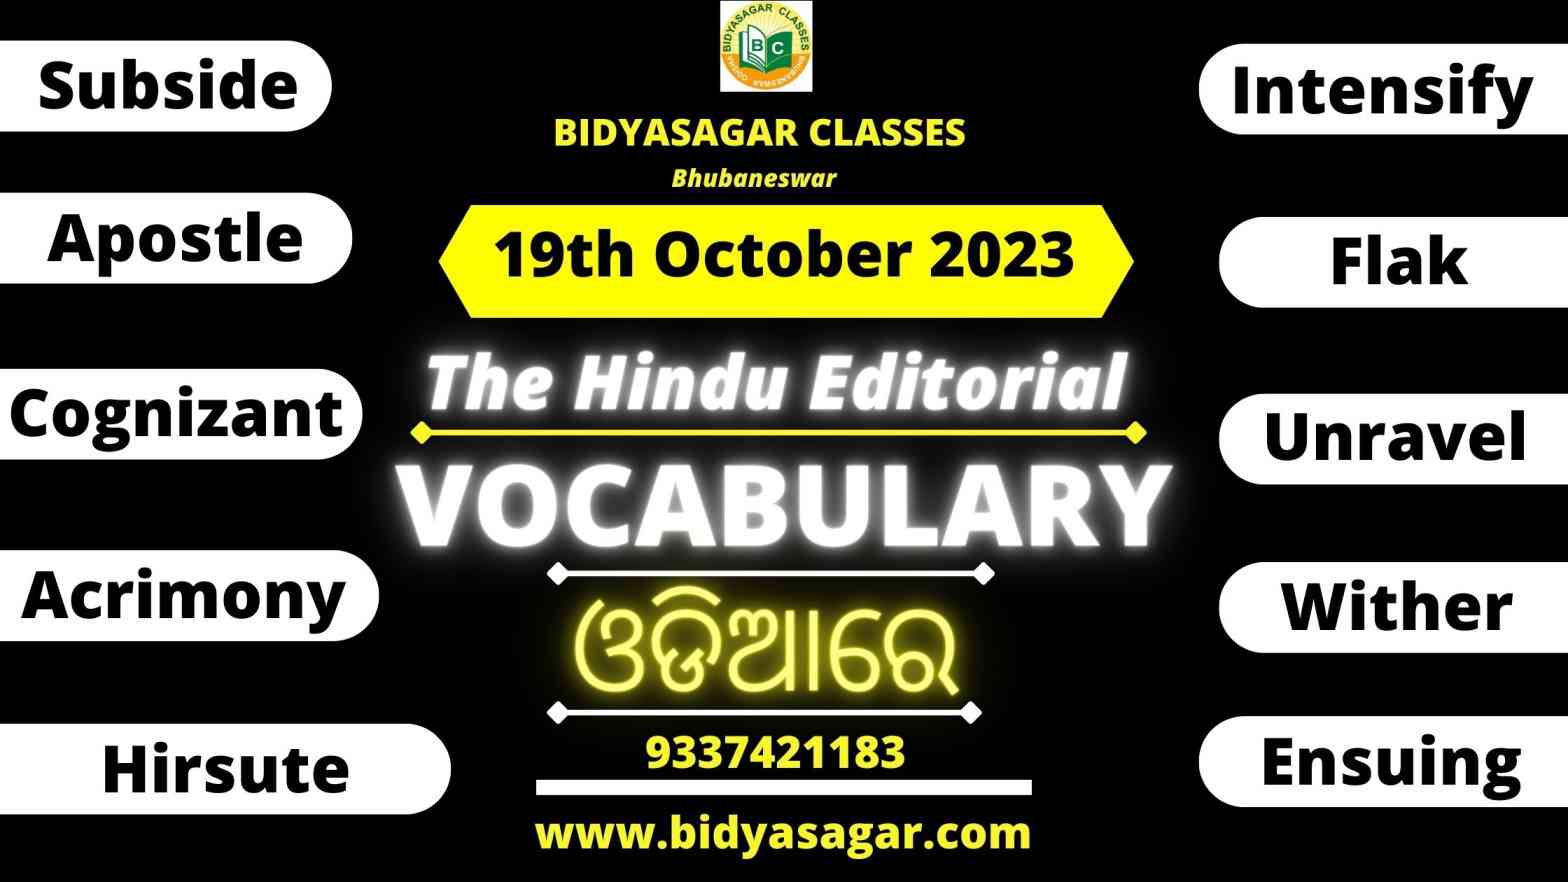 The Hindu Editorial Vocabulary of 19th October 2023